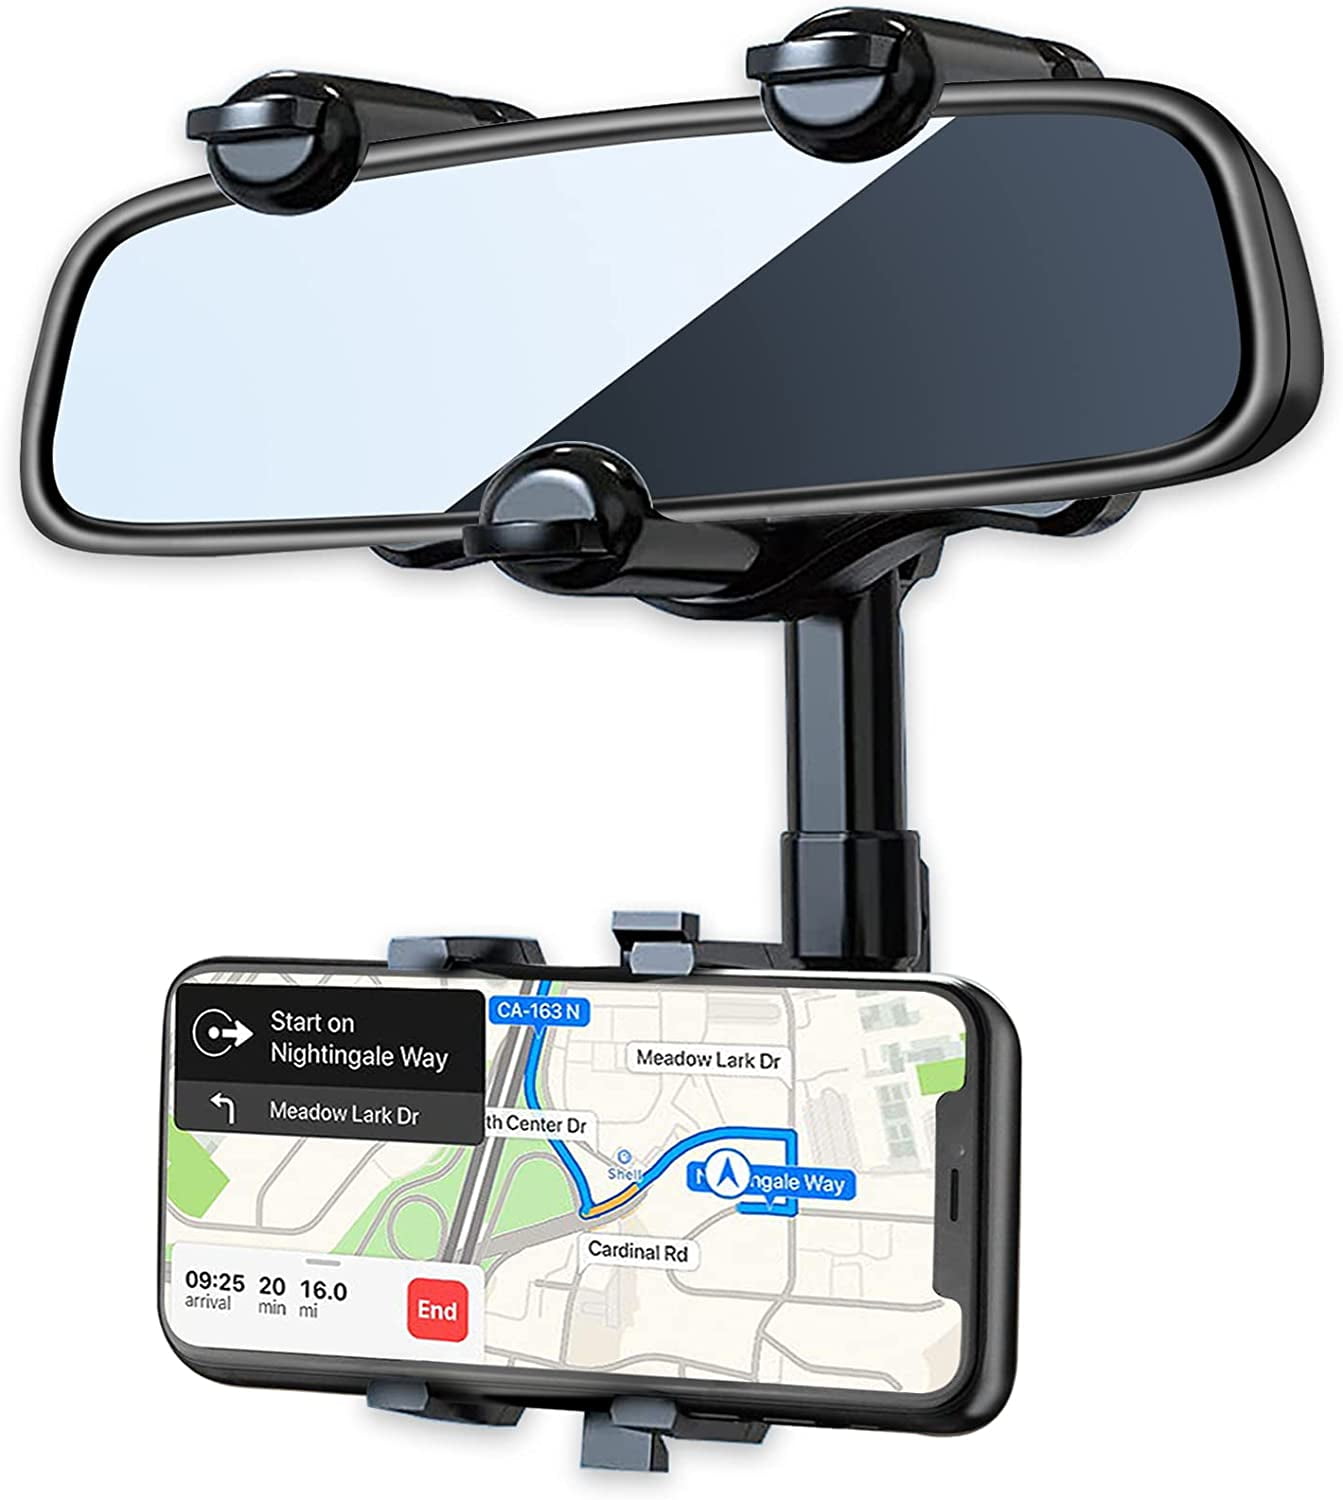 Rearview Mirror Phone Holder for Car, Pkyaa 360A Rotating Rear View Mirror Phone Mount with Adjustable Arm Length, Multifunctional Phone and GPS